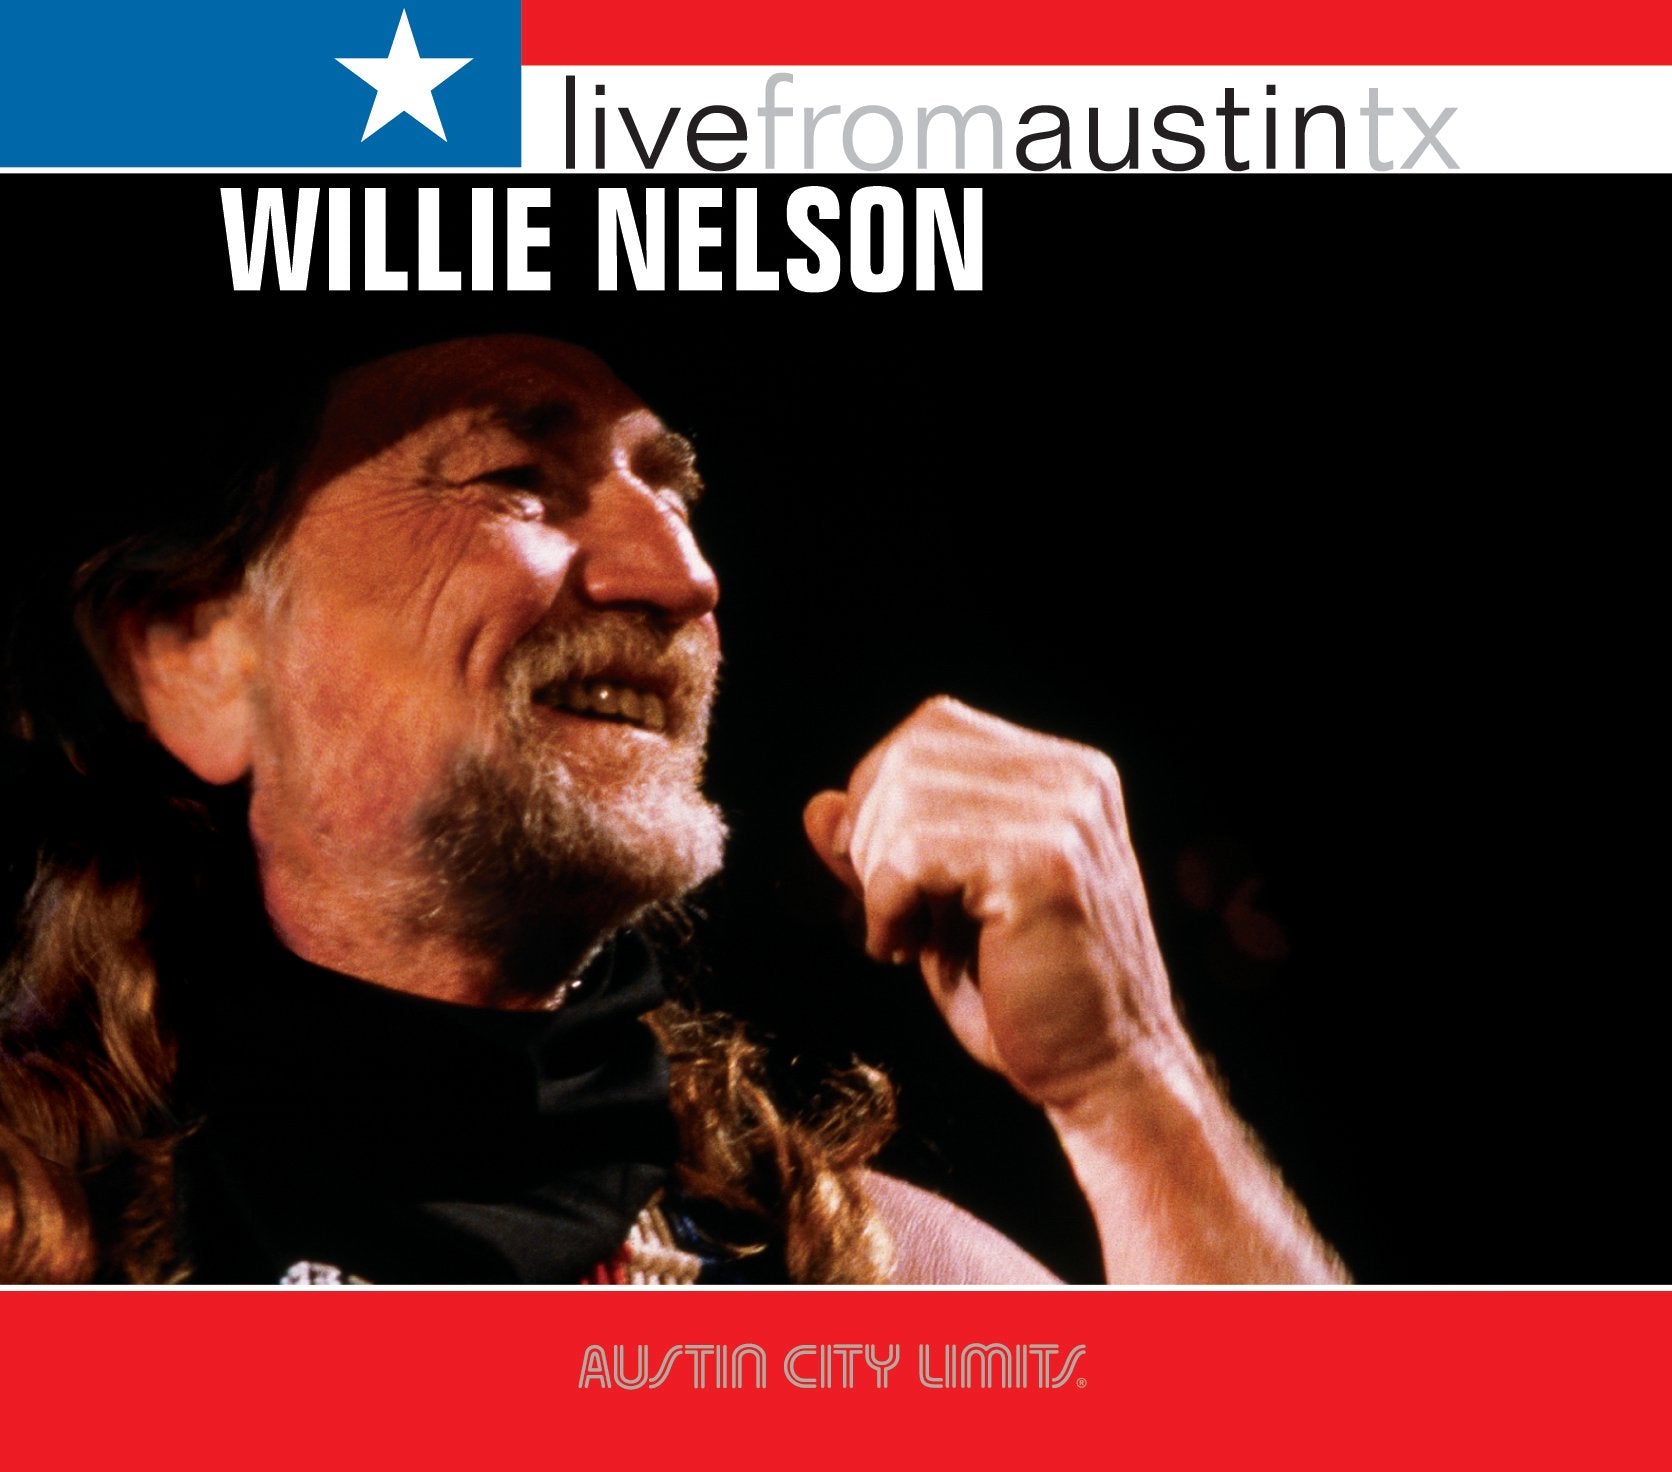 Willie Nelson - Live From Austin, TX [CD]